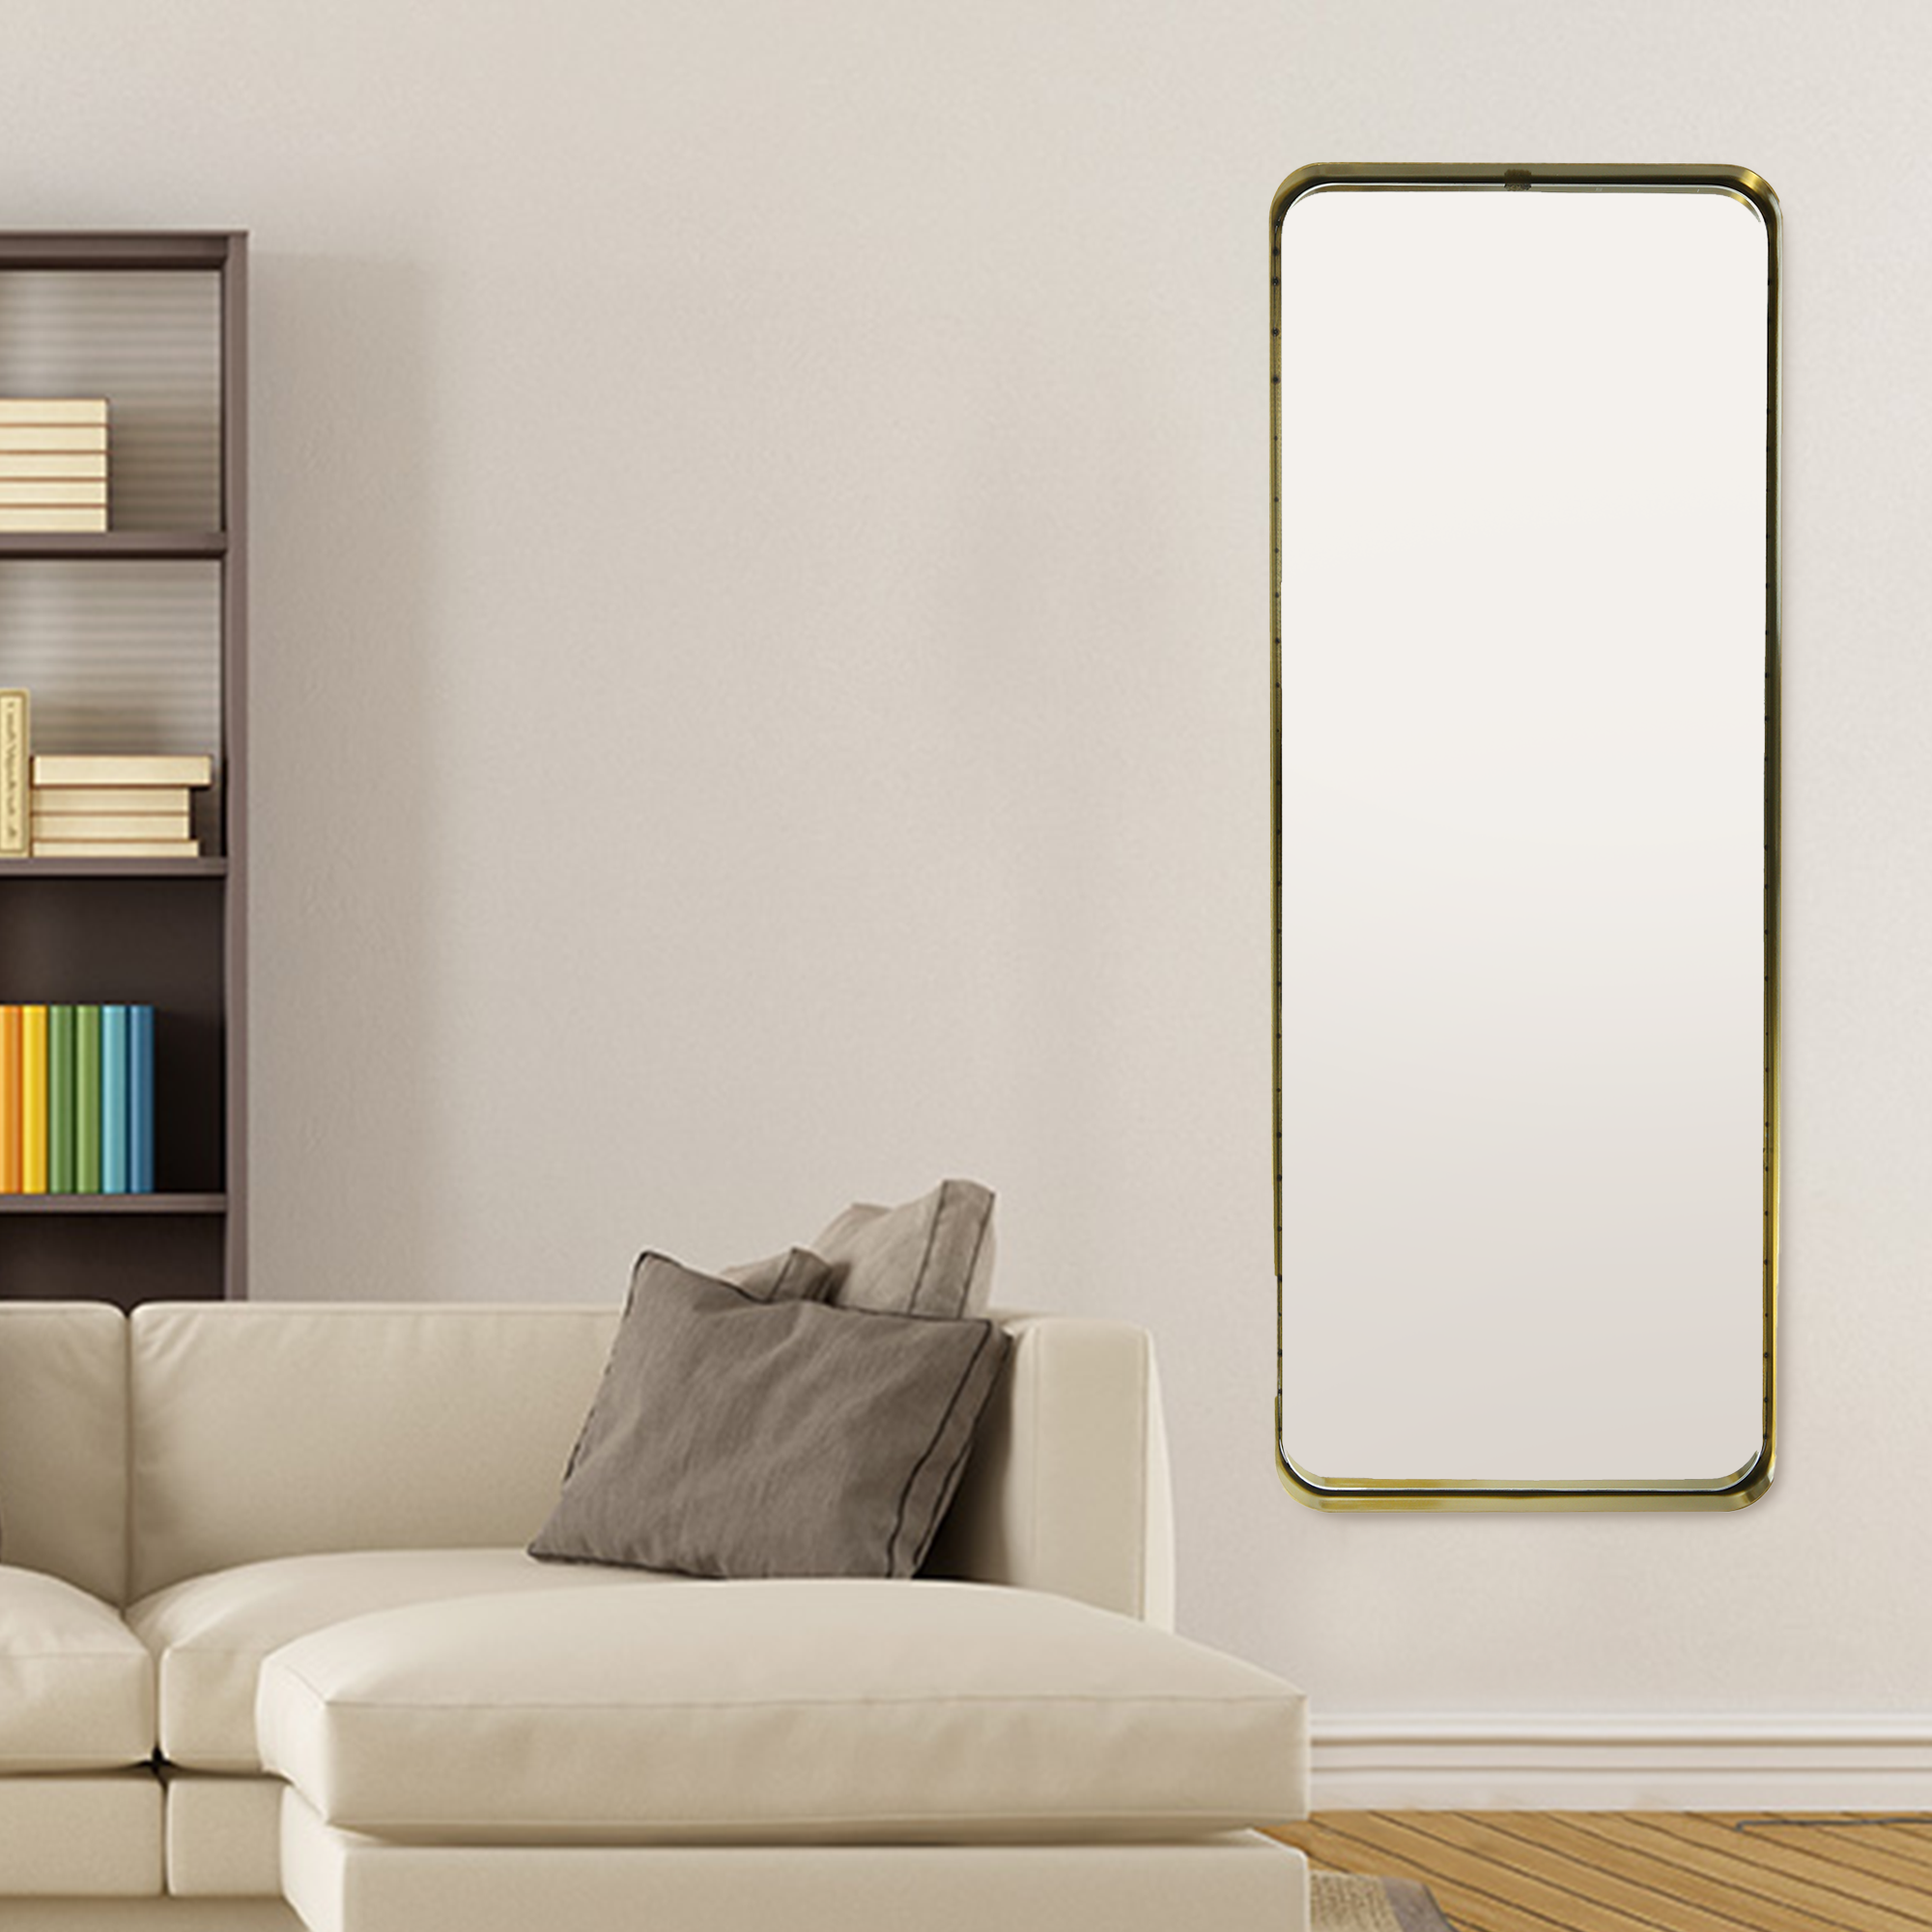 Gold Rectangle Freestanding or Hanging Mirror, 18"x 48”